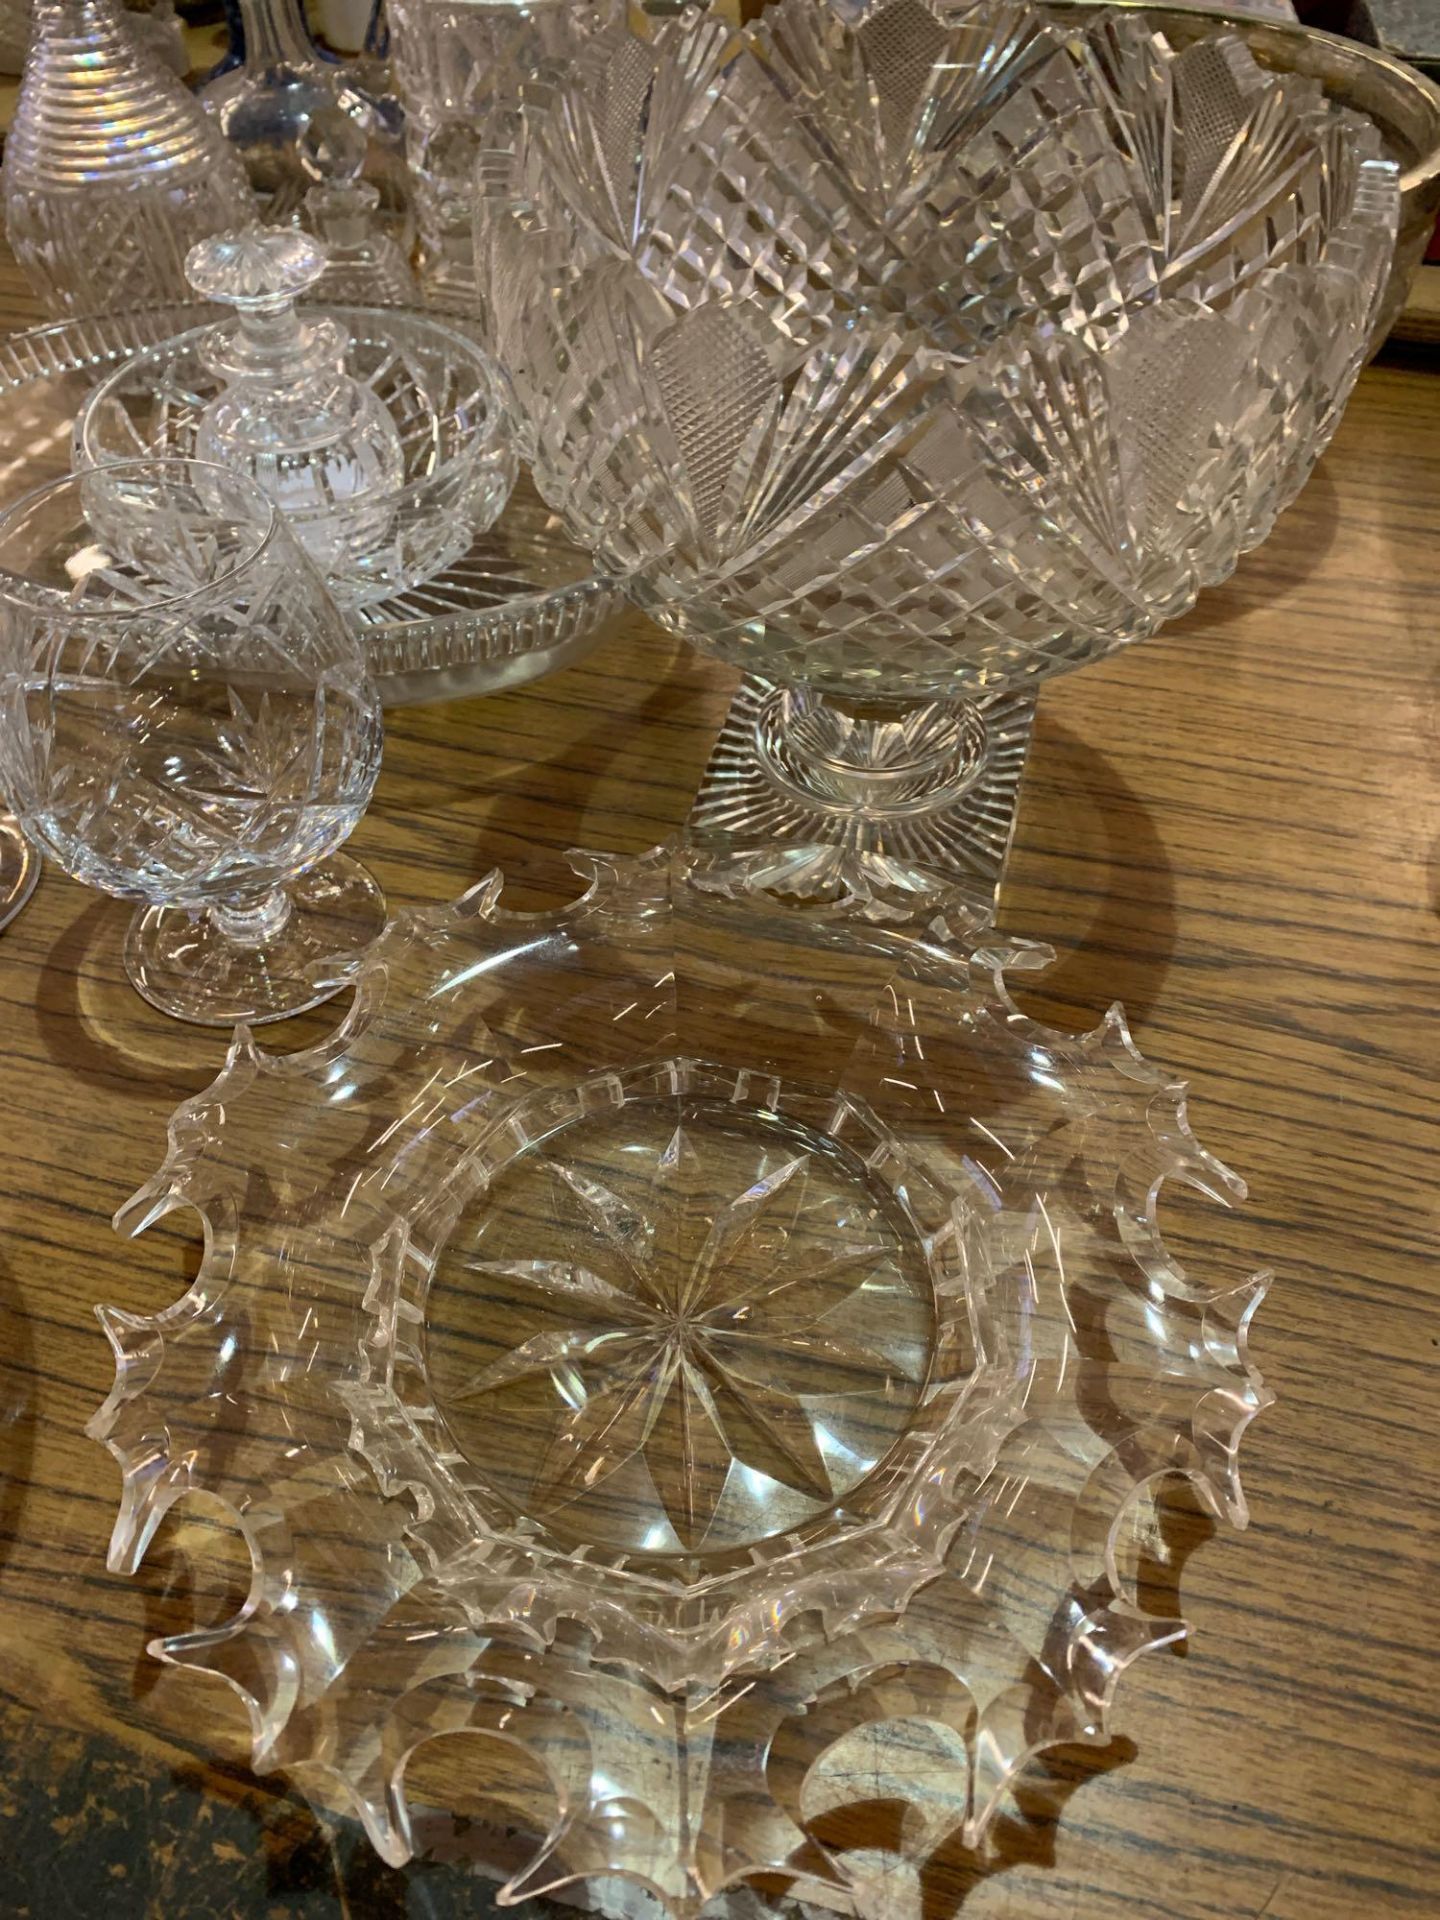 Three cut glass decanters and other cut glass items - Image 4 of 5